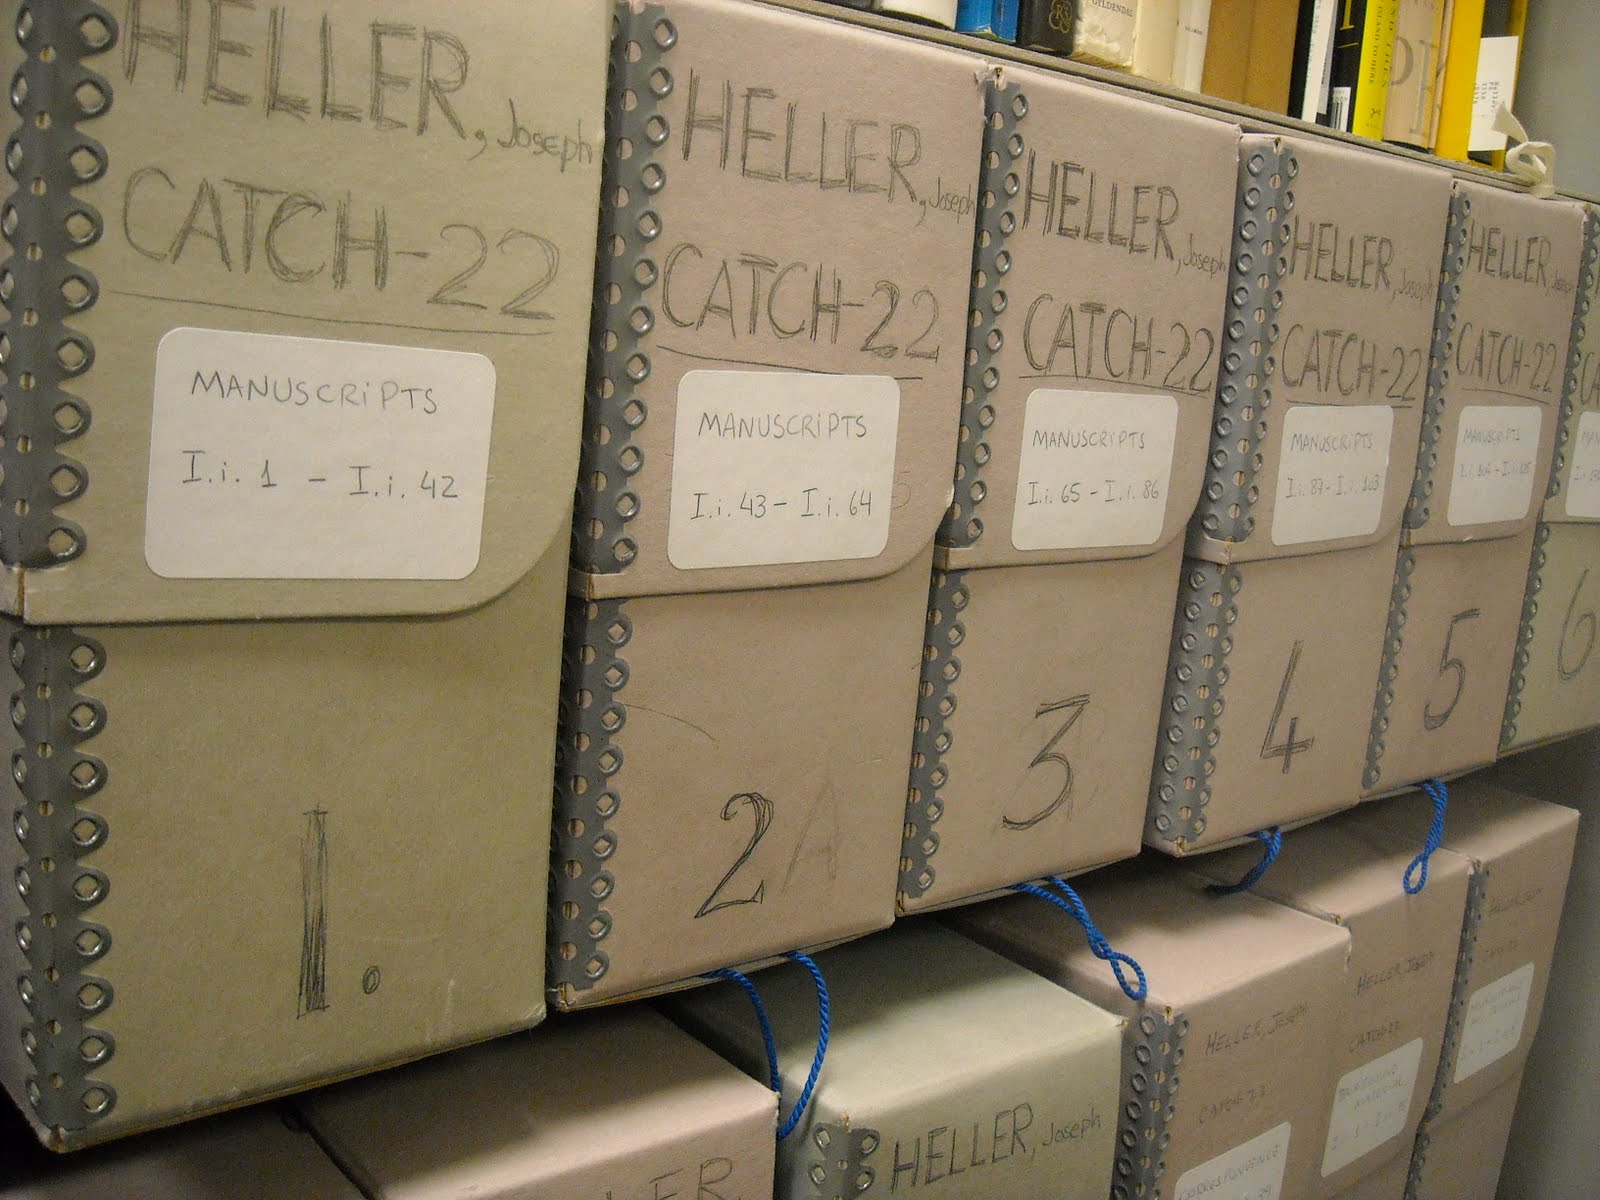 Various boxes aligned next to each other in a row, each contain a portion of the Joseph Heller Collection